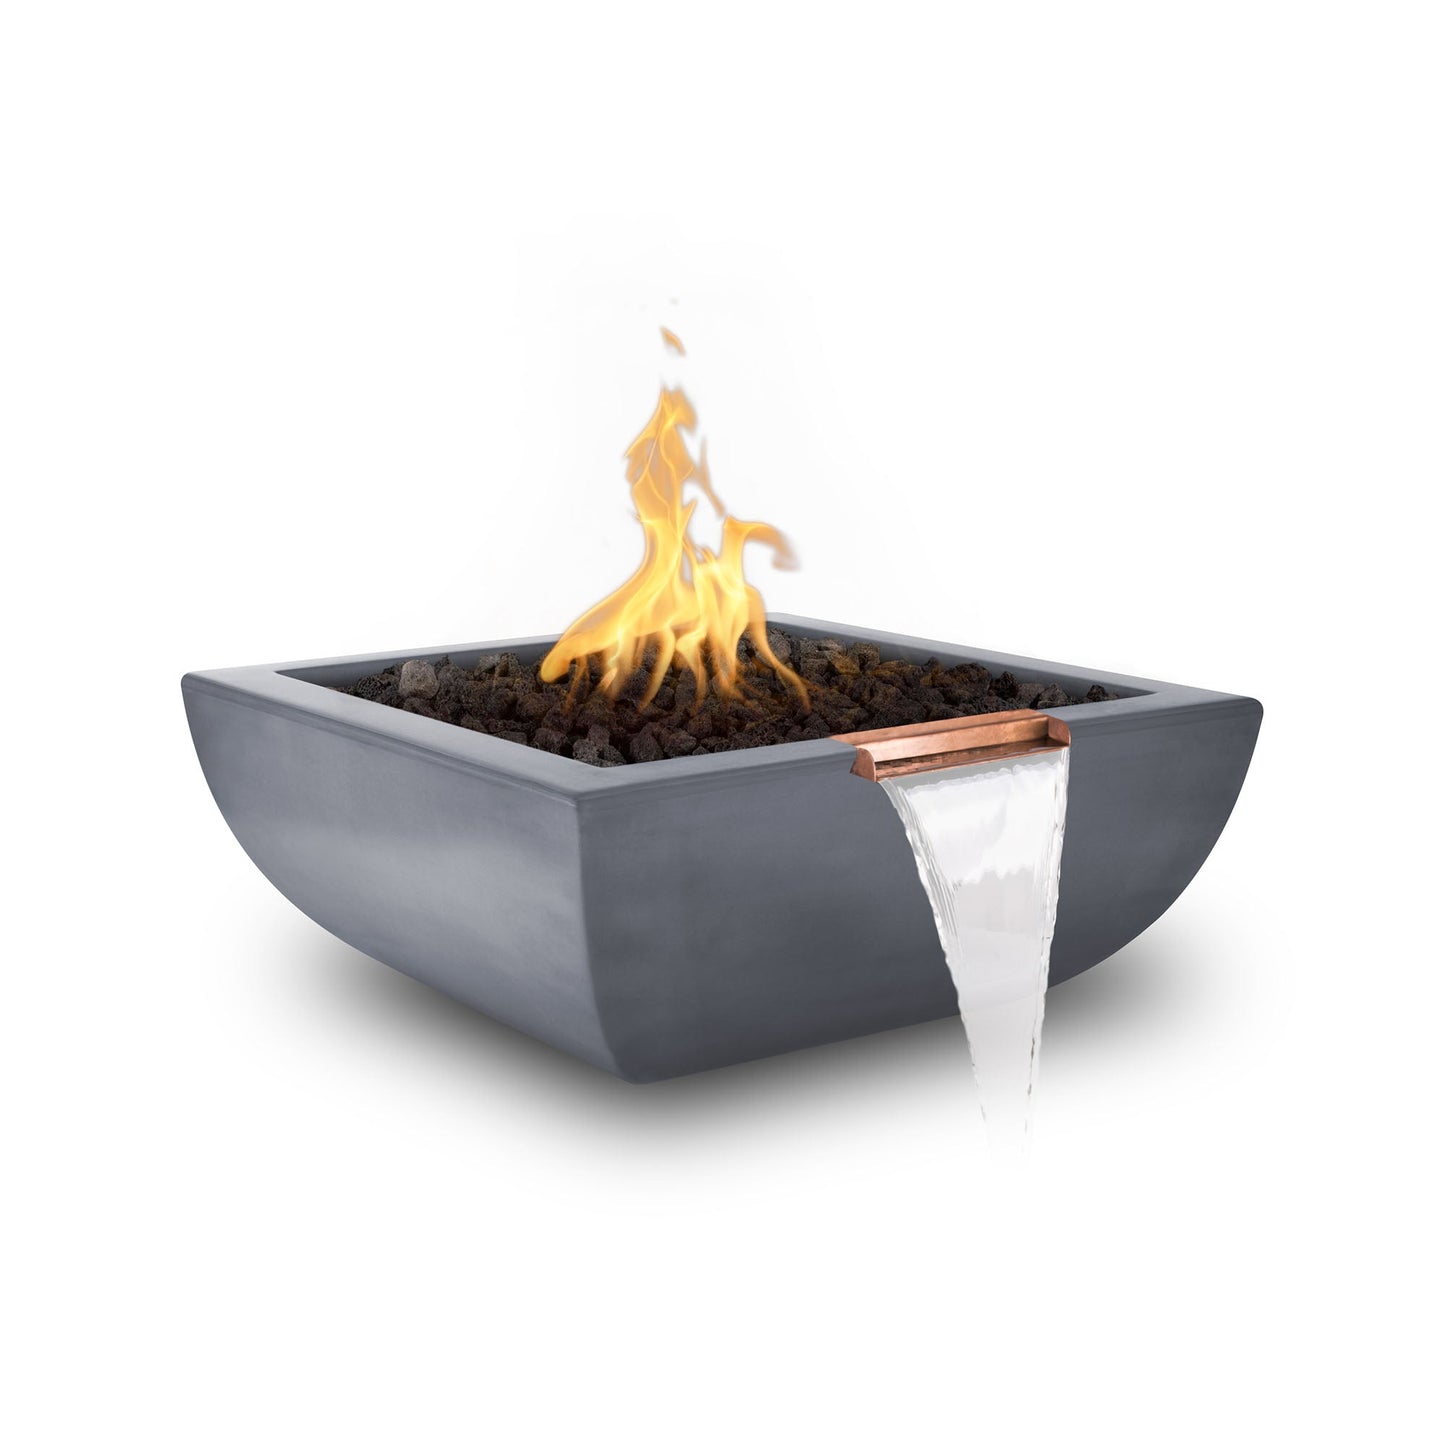 The Outdoor Plus Square Avalon 24" Chestnut GFRC Concrete Liquid Propane Fire & Water Bowl with Match Lit with Flame Sense Ignition